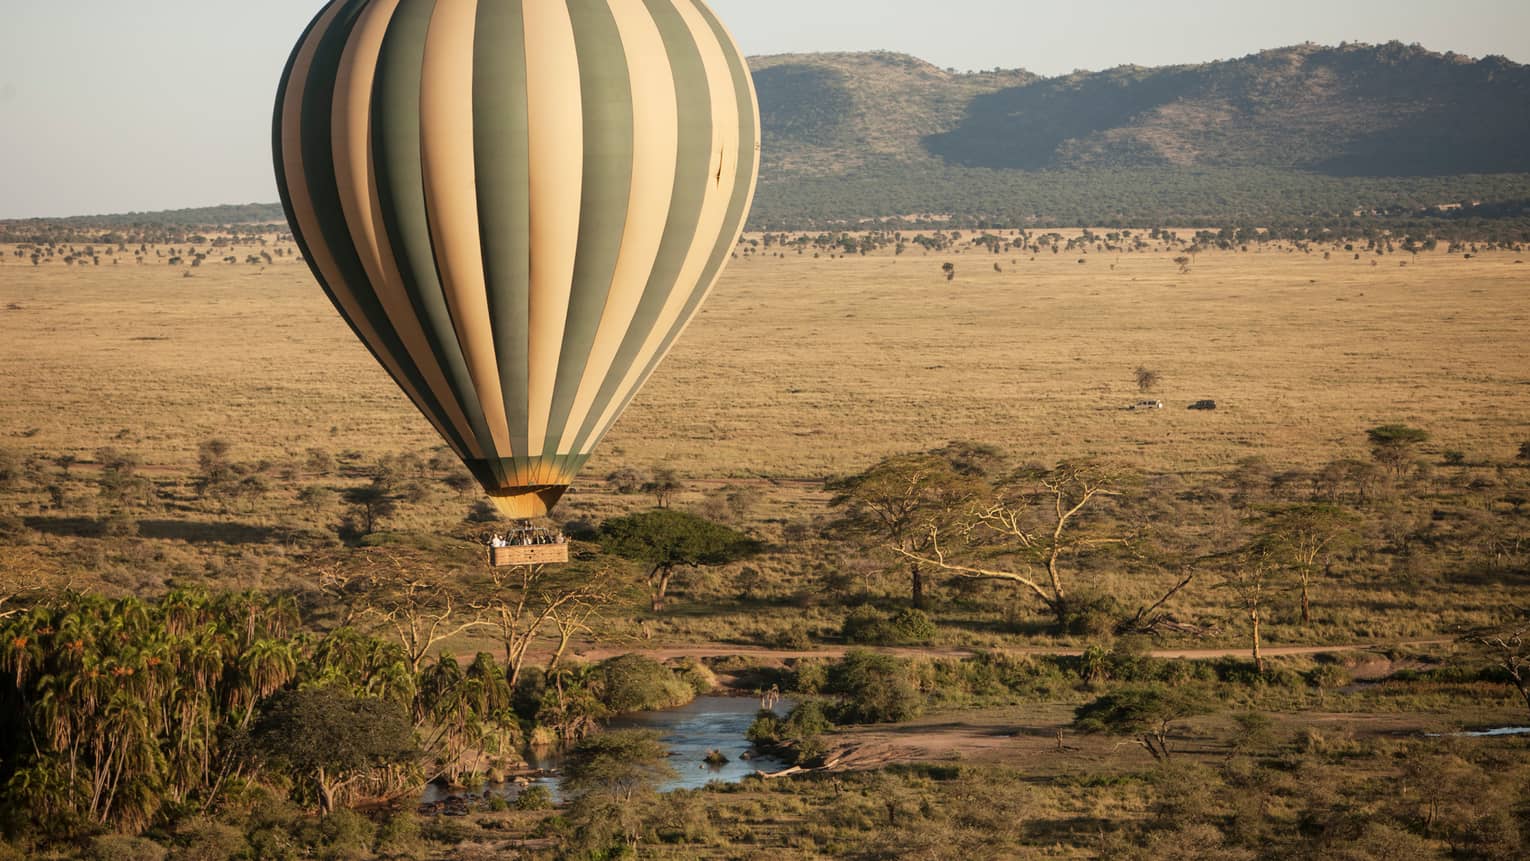 Striped hot air balloon hovers over Serengeti field